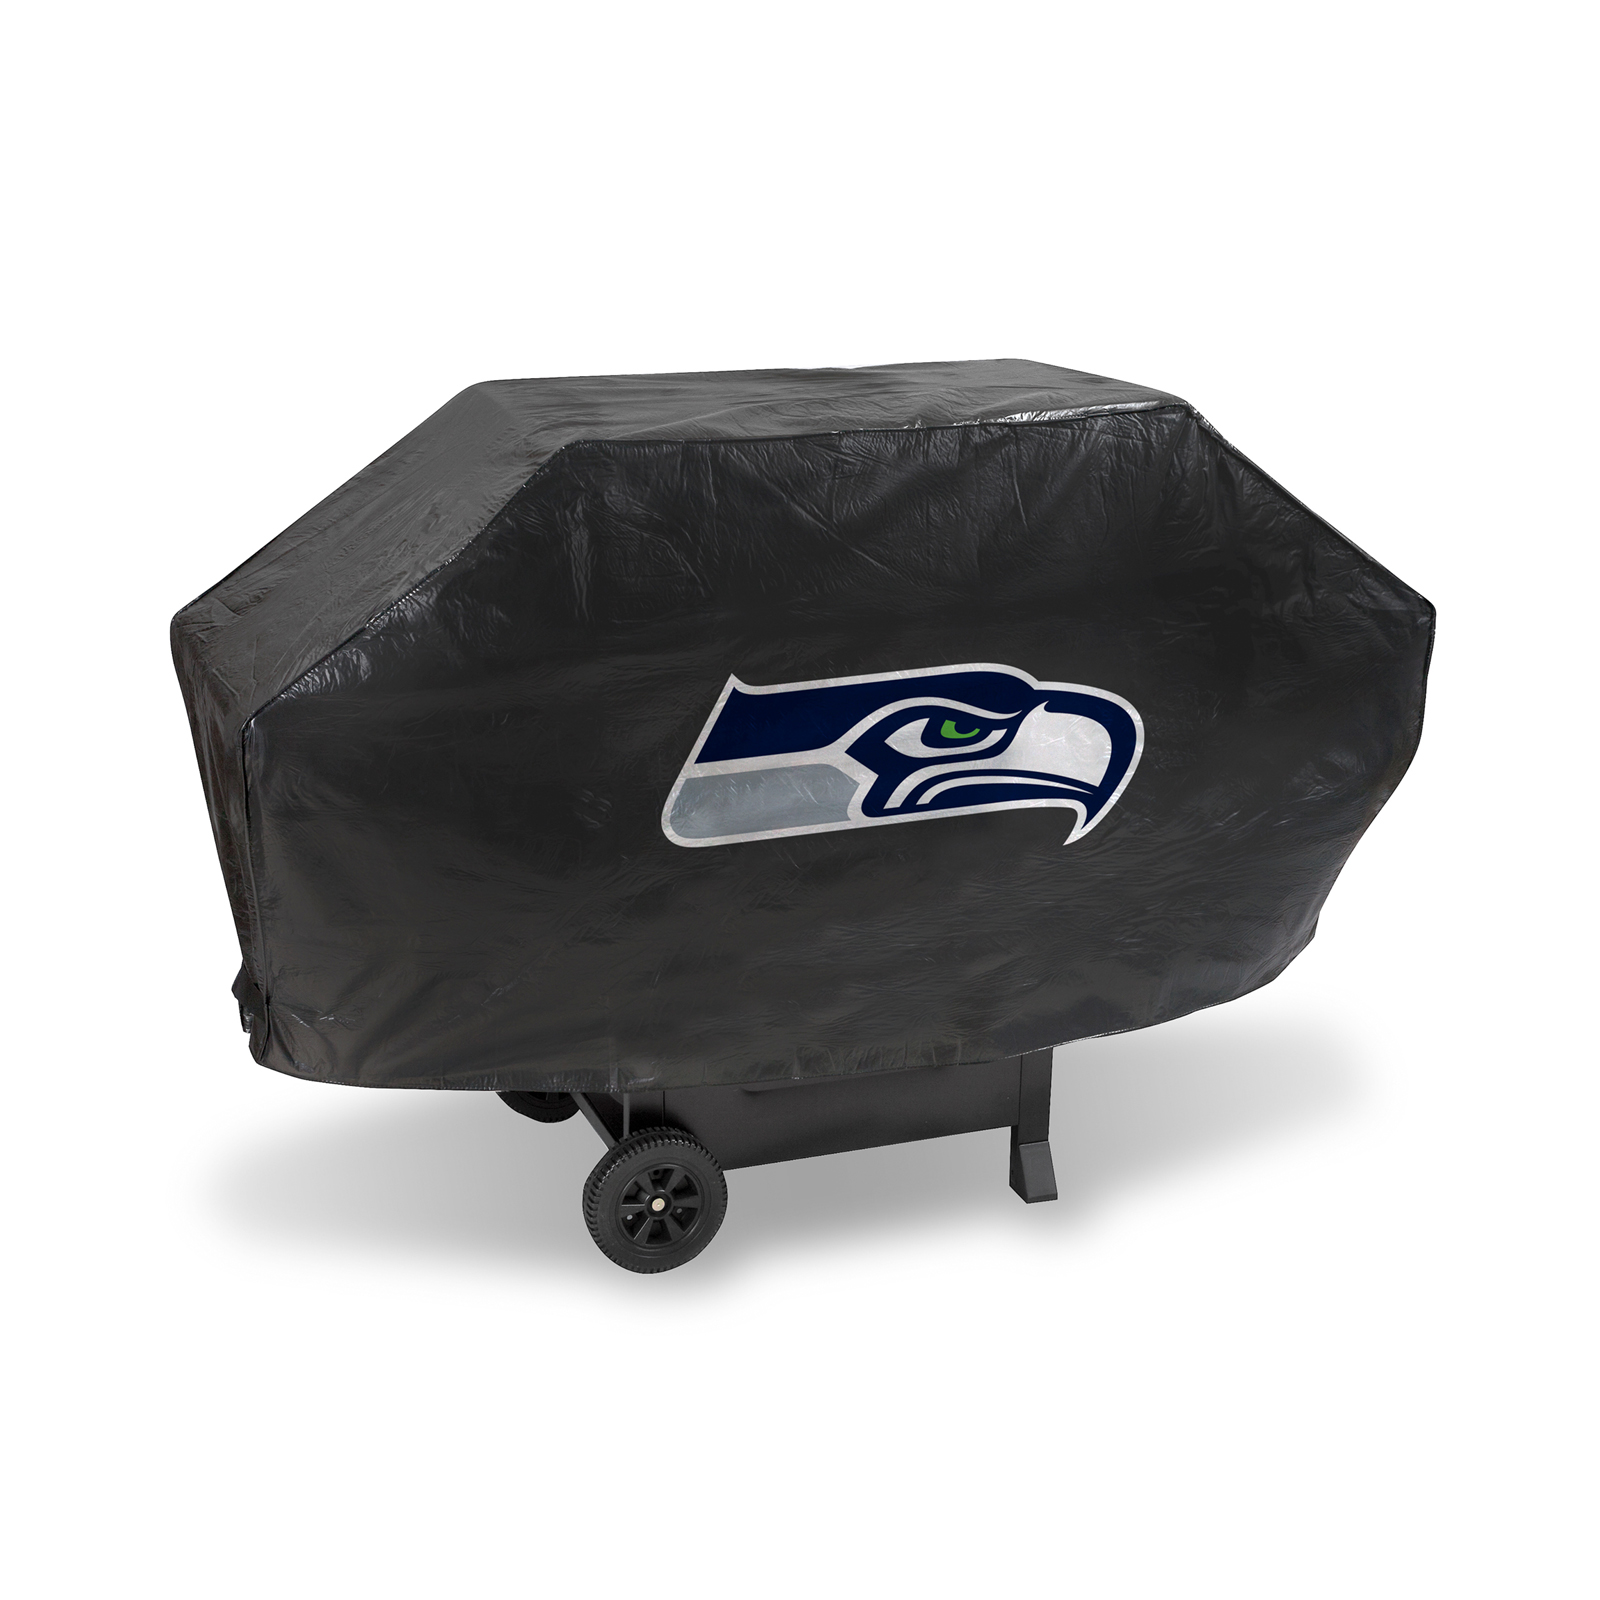 Rico Seattle Seahawks Deluxe Grill Cover